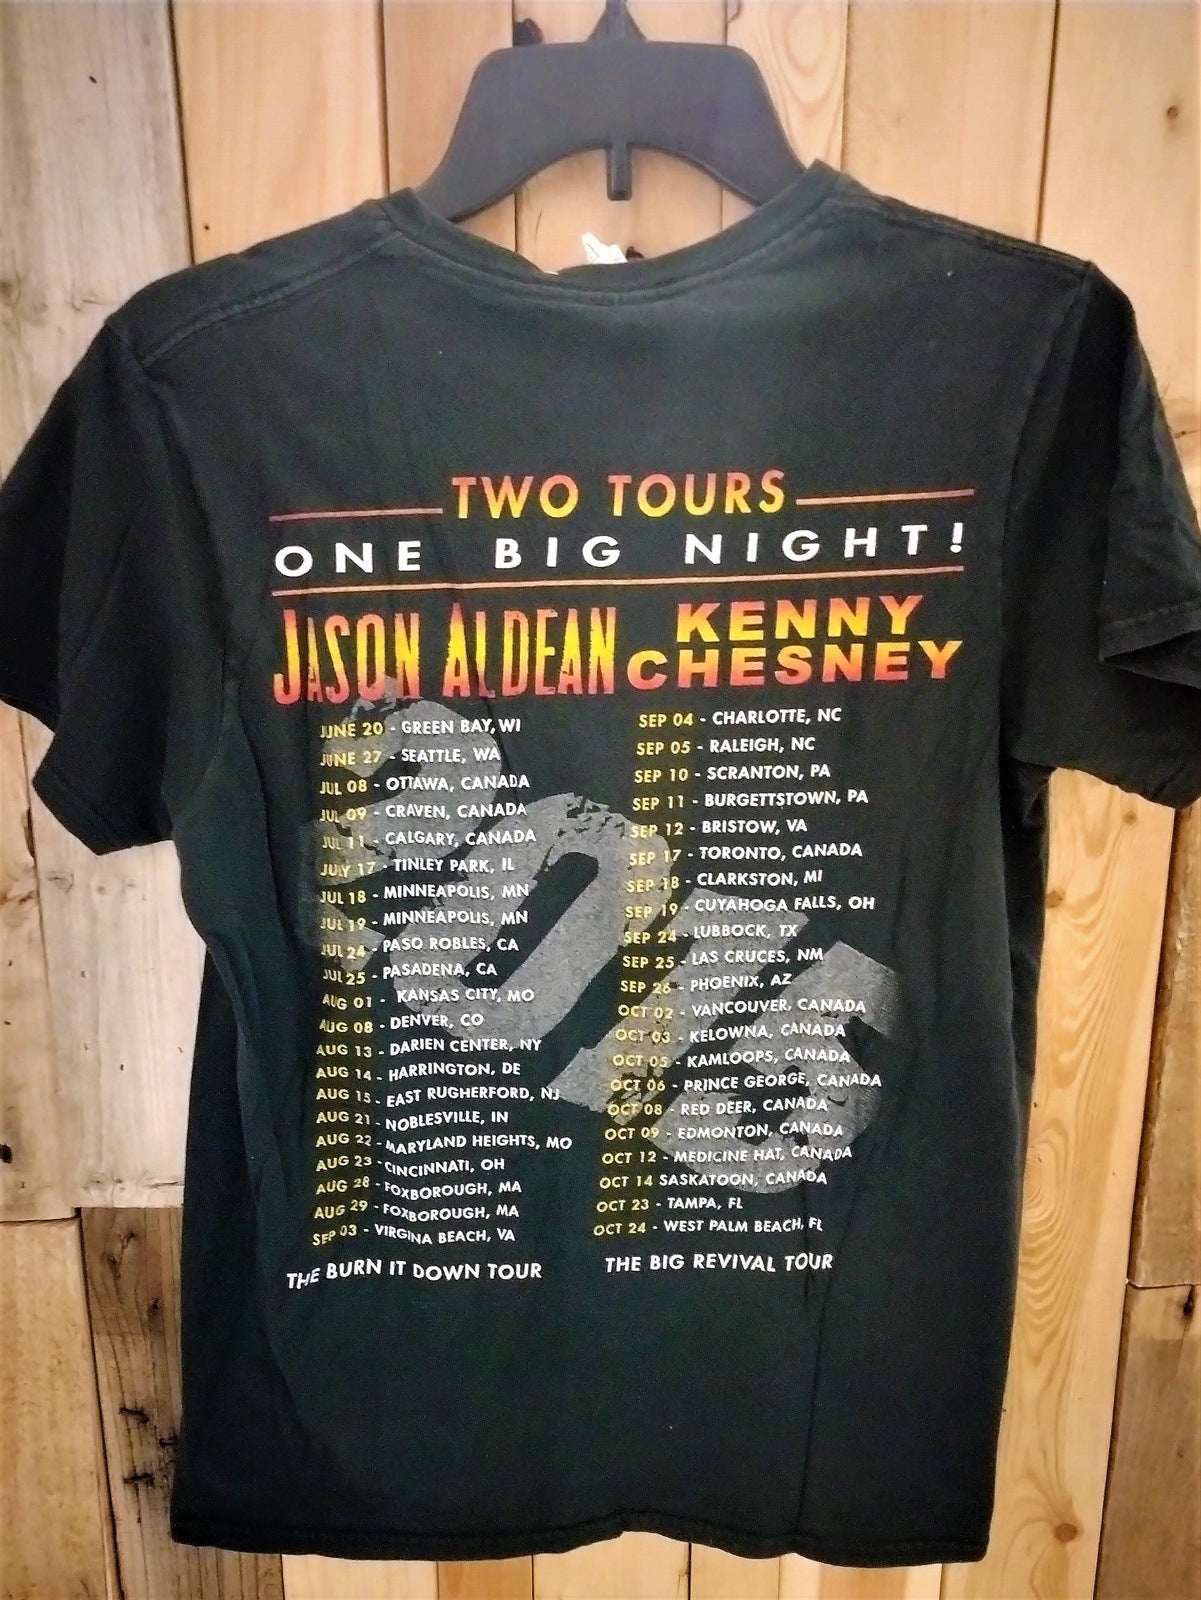 Kenny Chesney and Jason Aldean 2015 "Two Tours One Big Night" Women's T Shirt Size Medium 375724WH